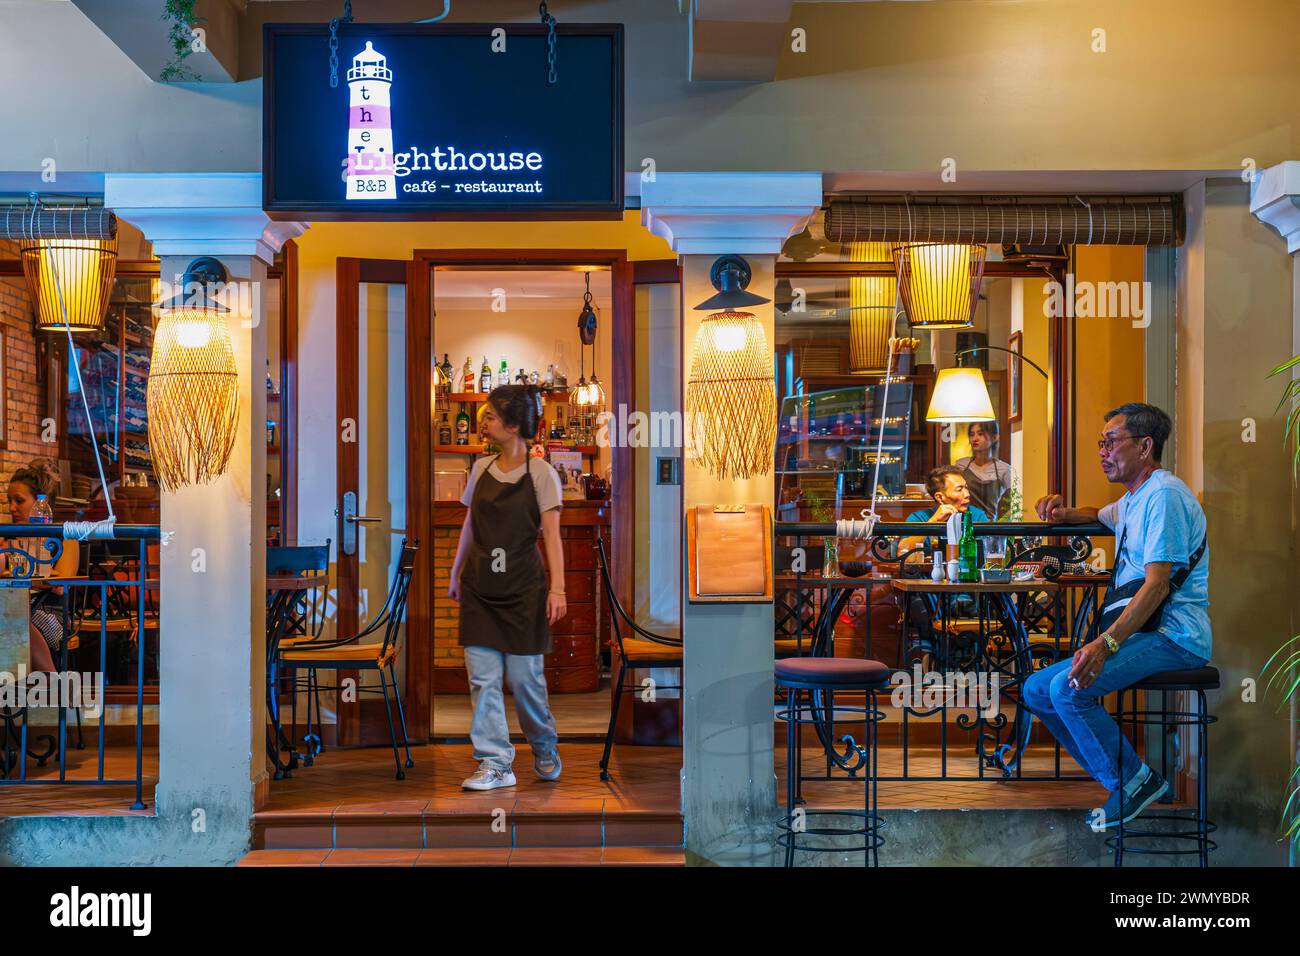 Vietnam, Mekong Delta, Can Tho, The Lighthouse café and restaurant Stock Photo